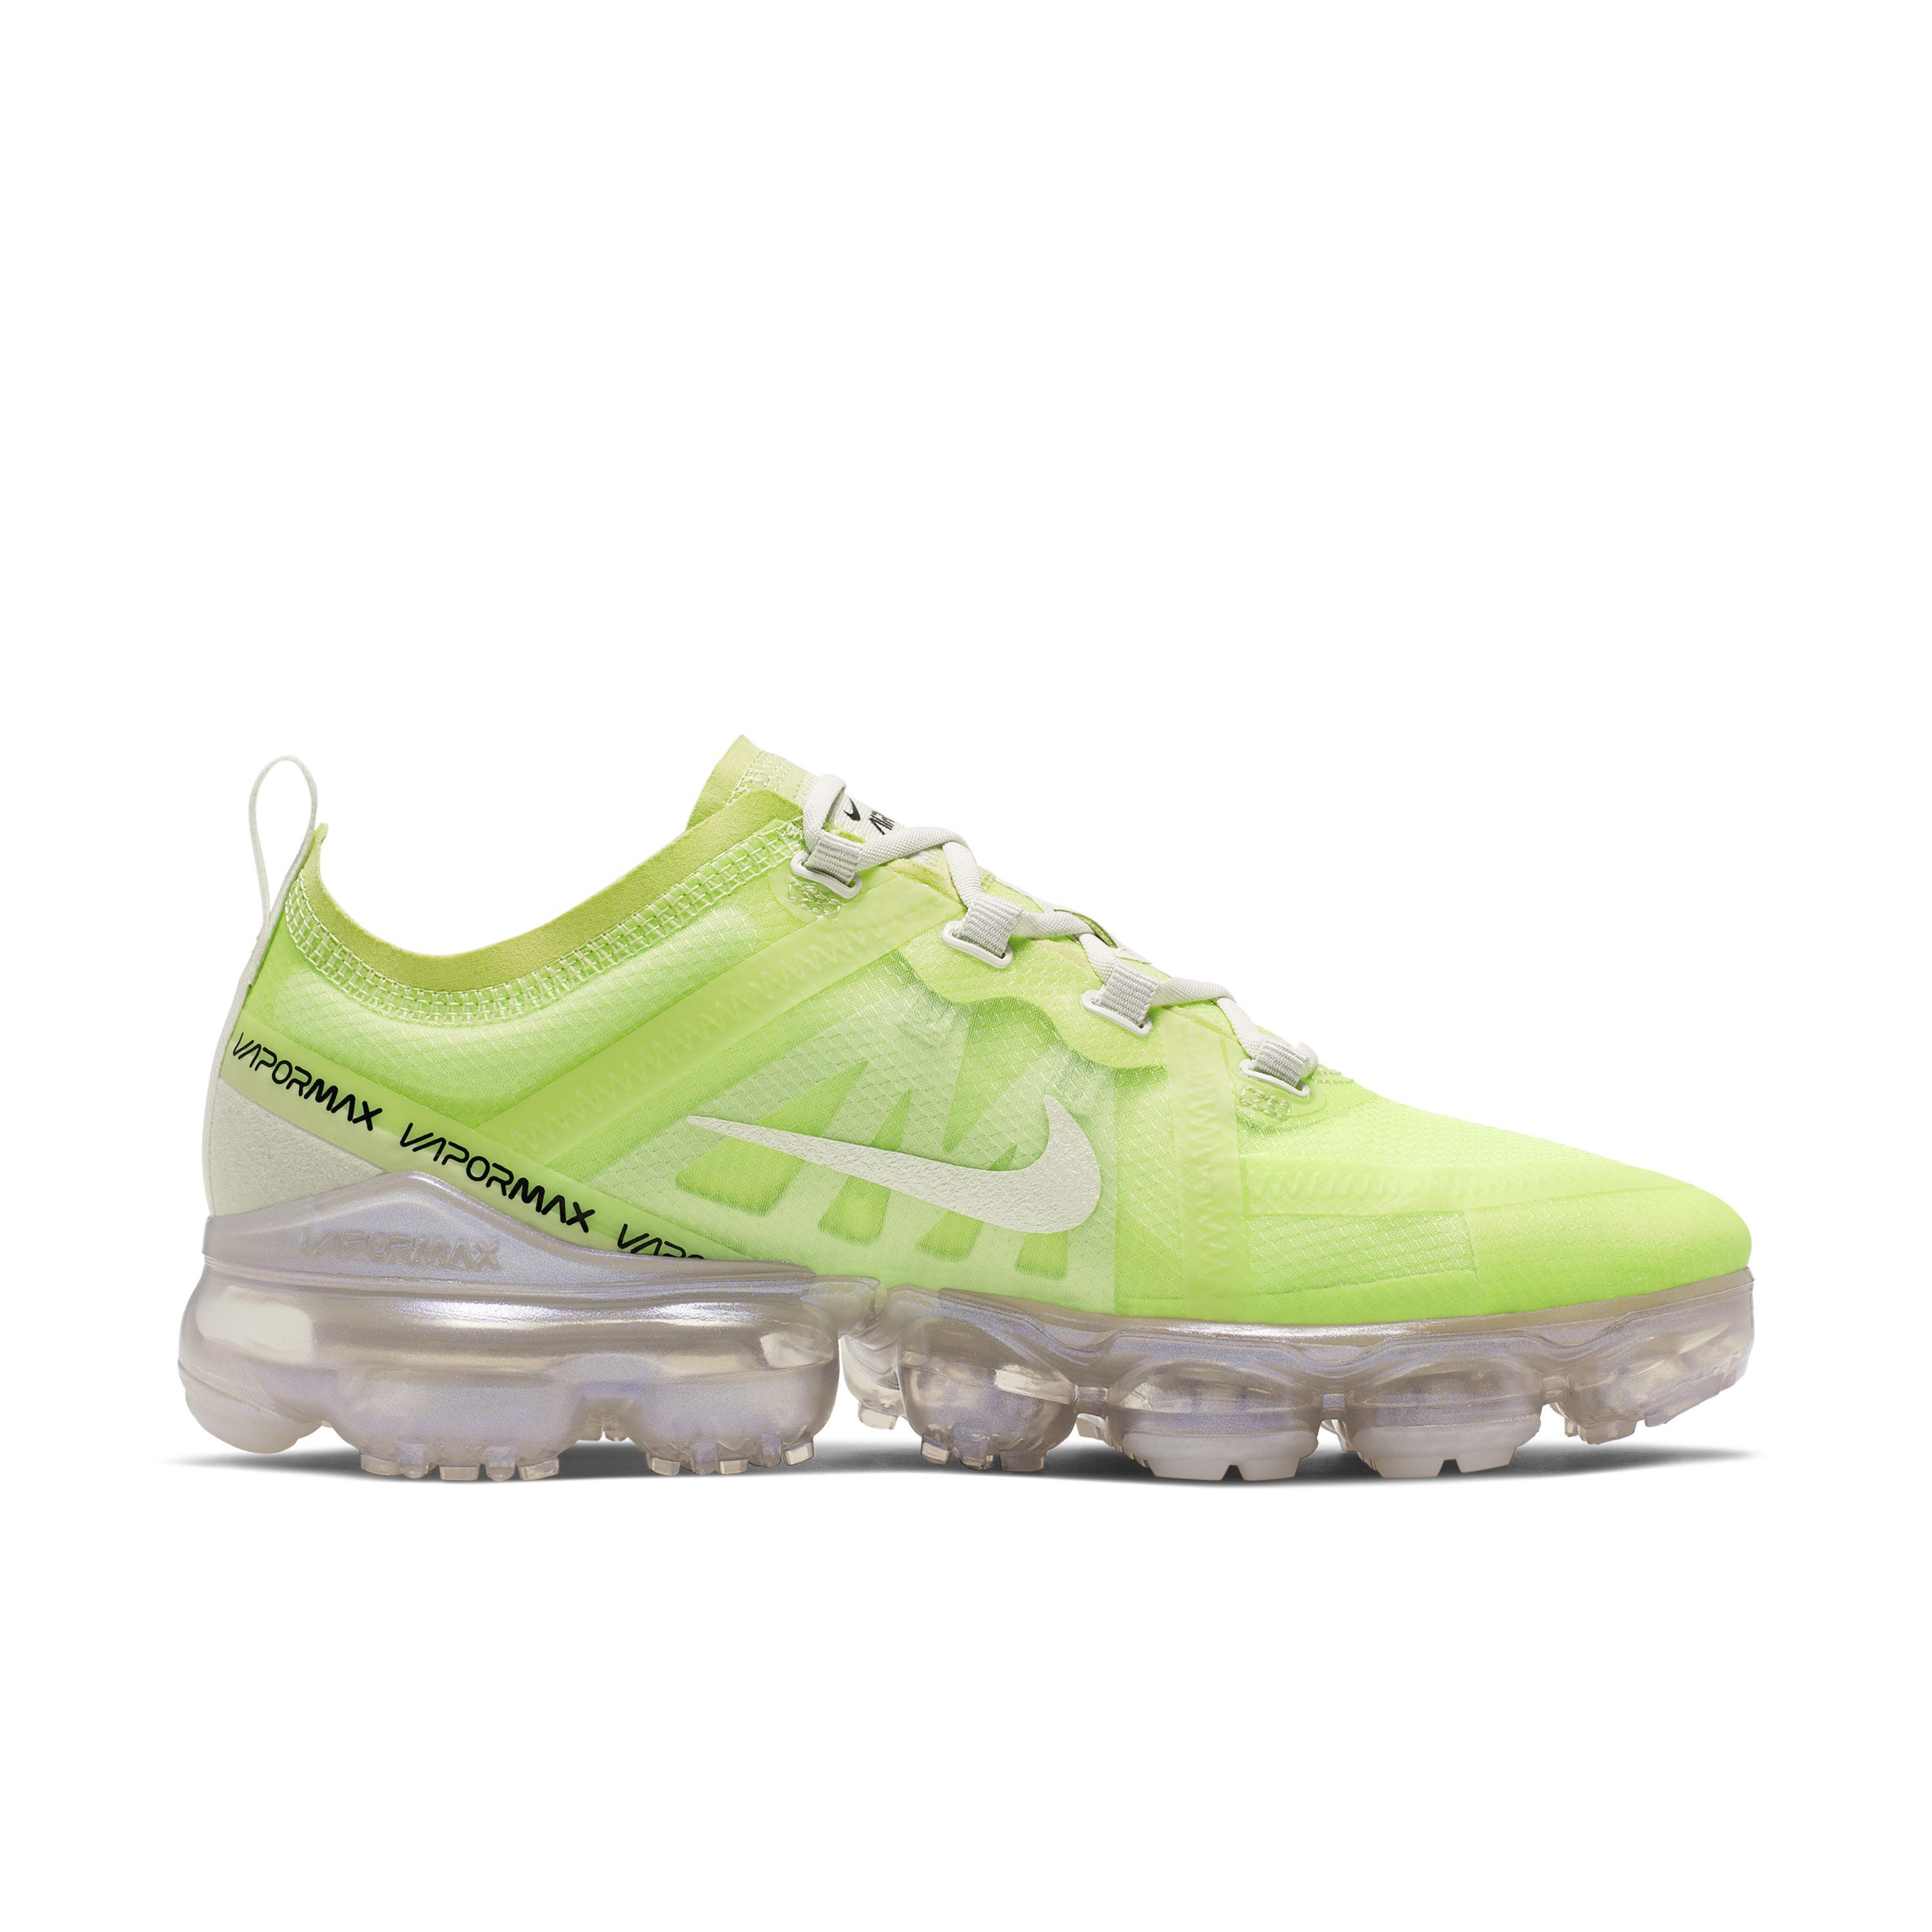 Nike Rubber Air Vapormax Se Mesh And Pvc Sneakers in Green - Lyst